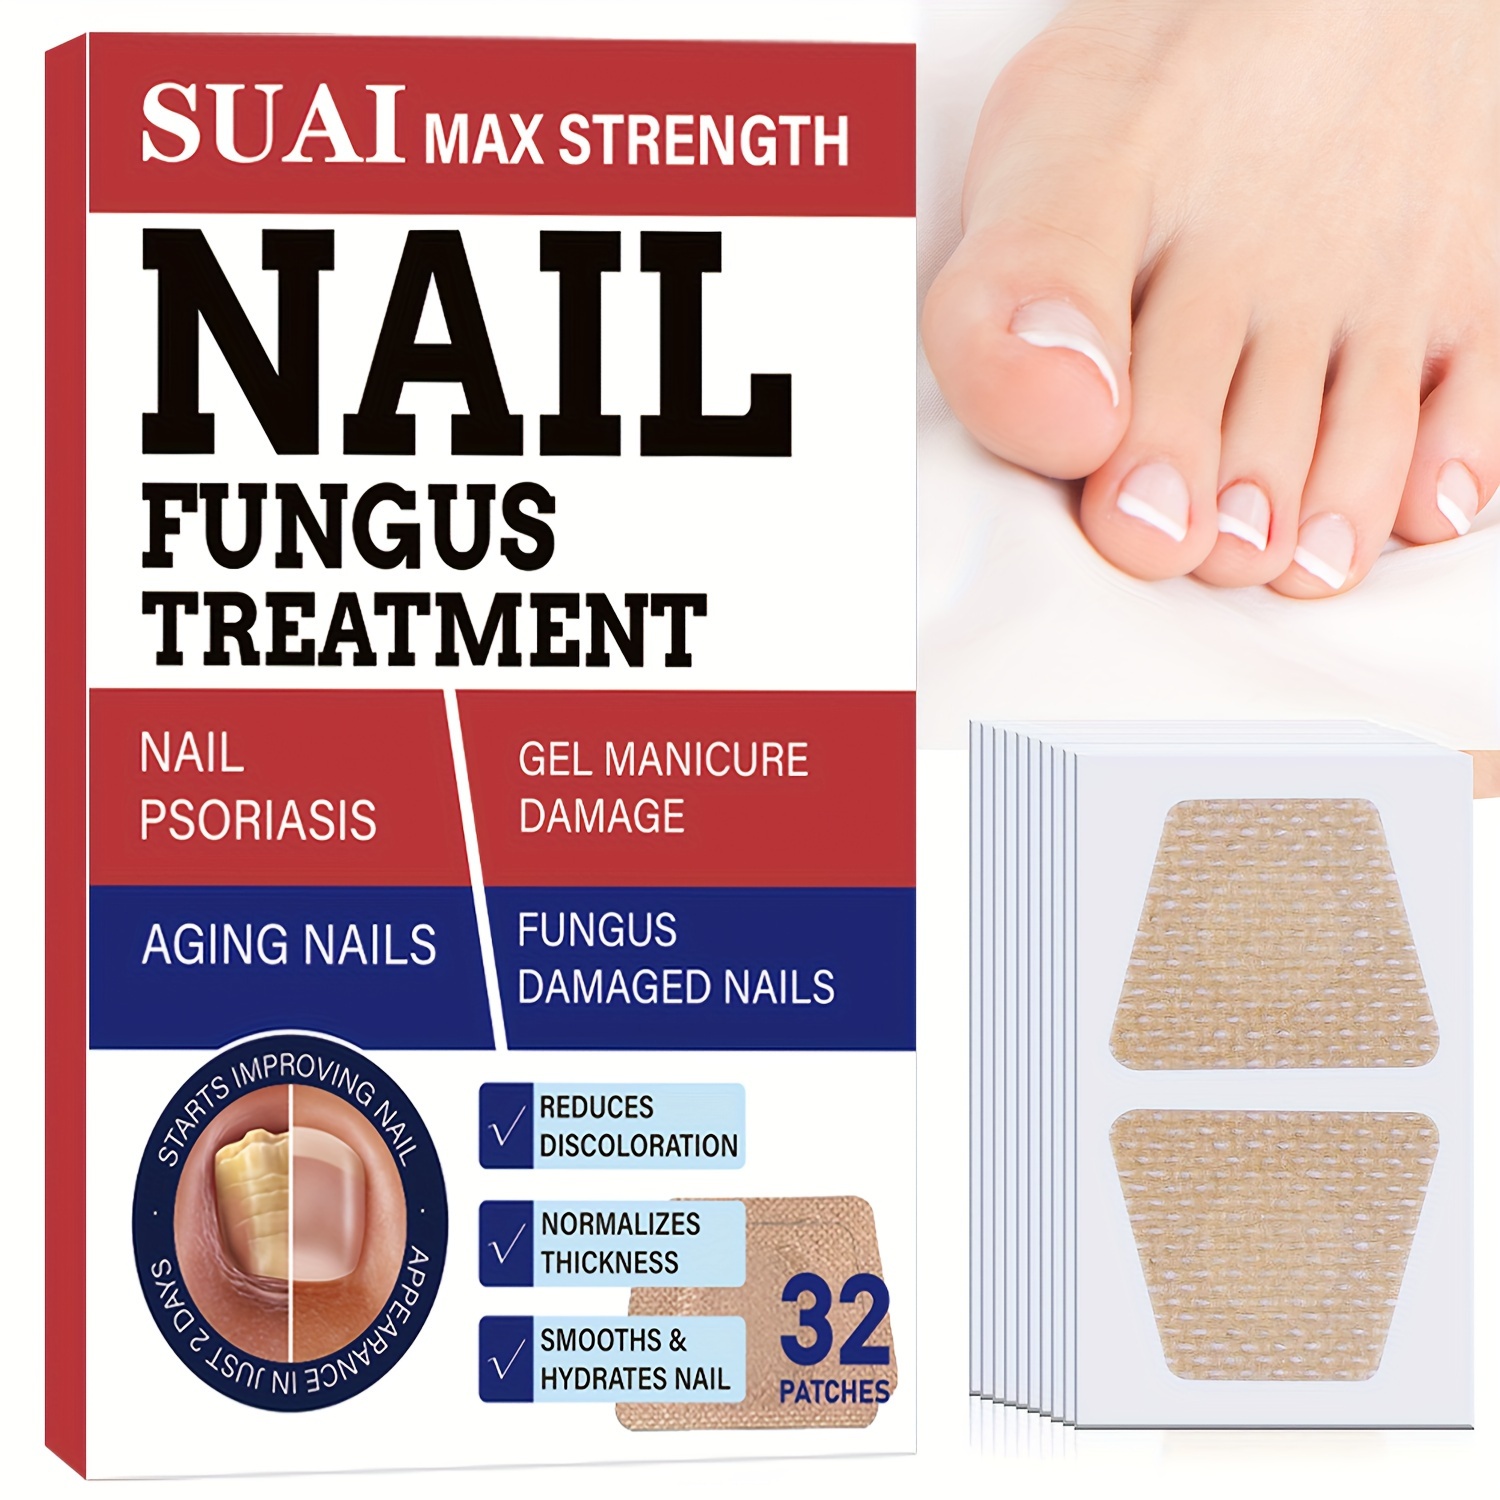 Get Rid Of Toenail Fungus for Good: Dr. Berg's $2.00 Cure - YouTube